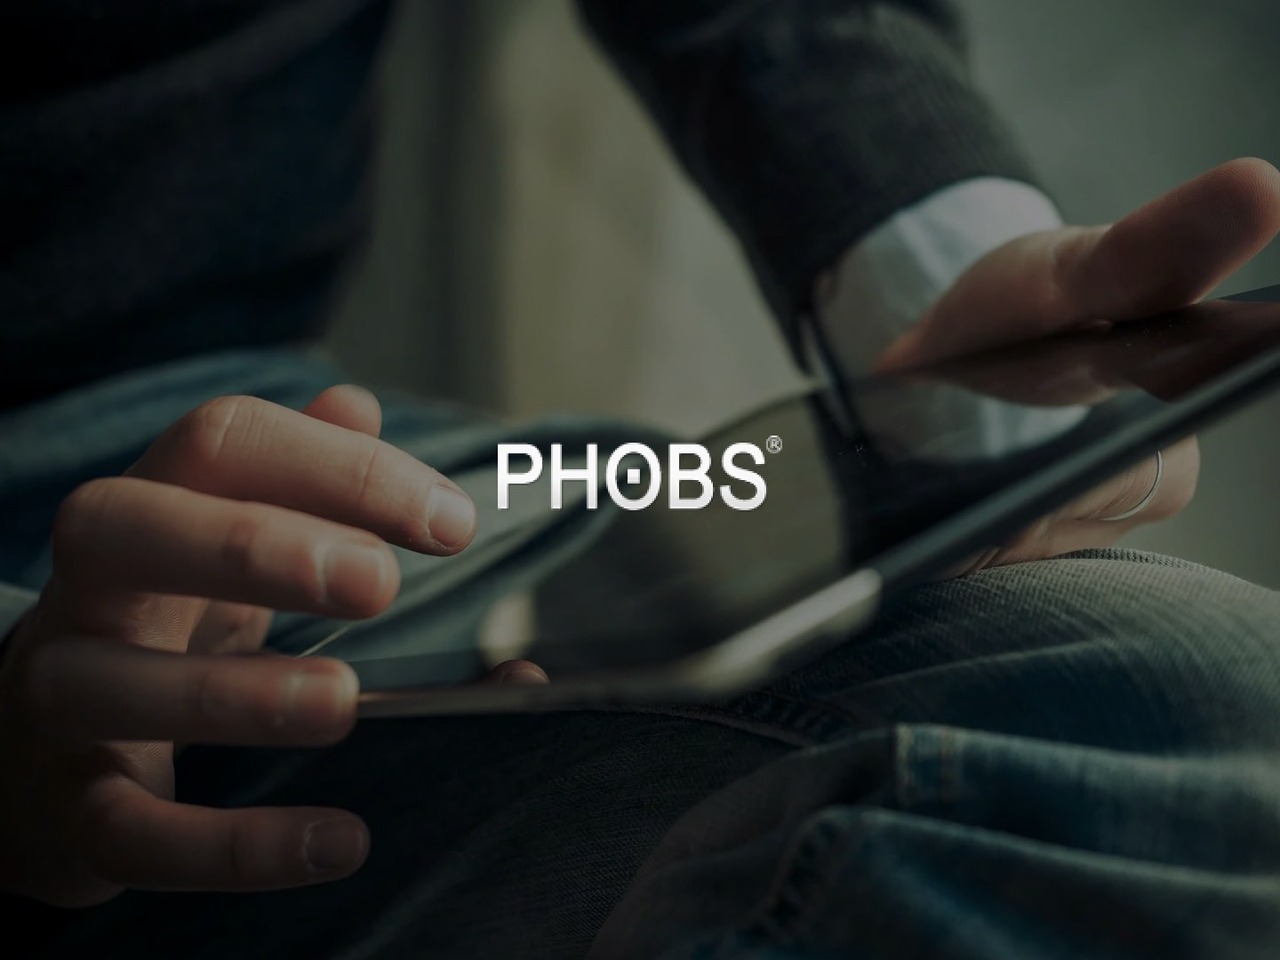 PHOBS accommodation reservation system implemented